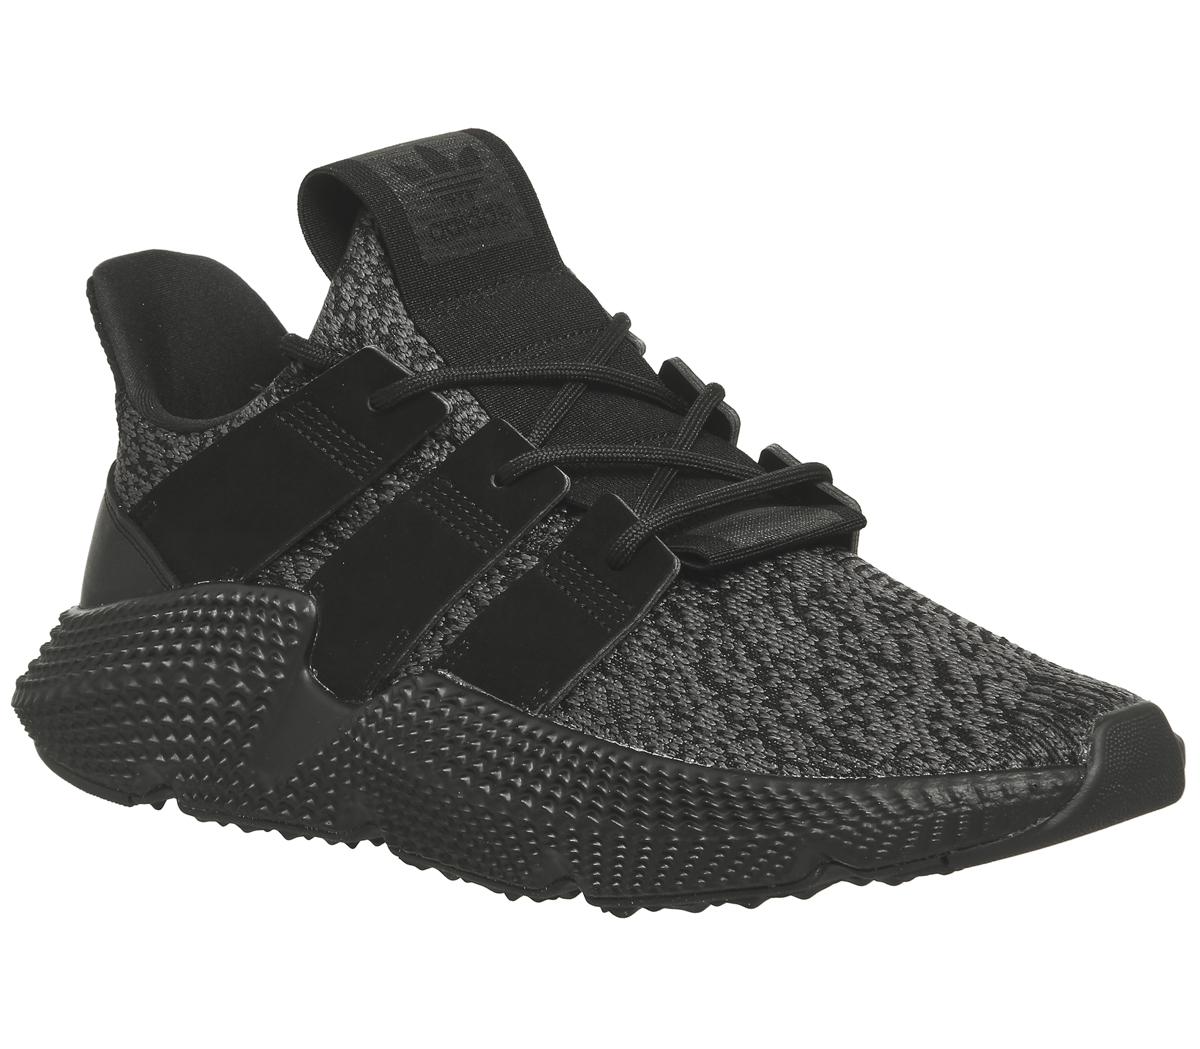 adidas Prophere Trainers Core Black - His trainers